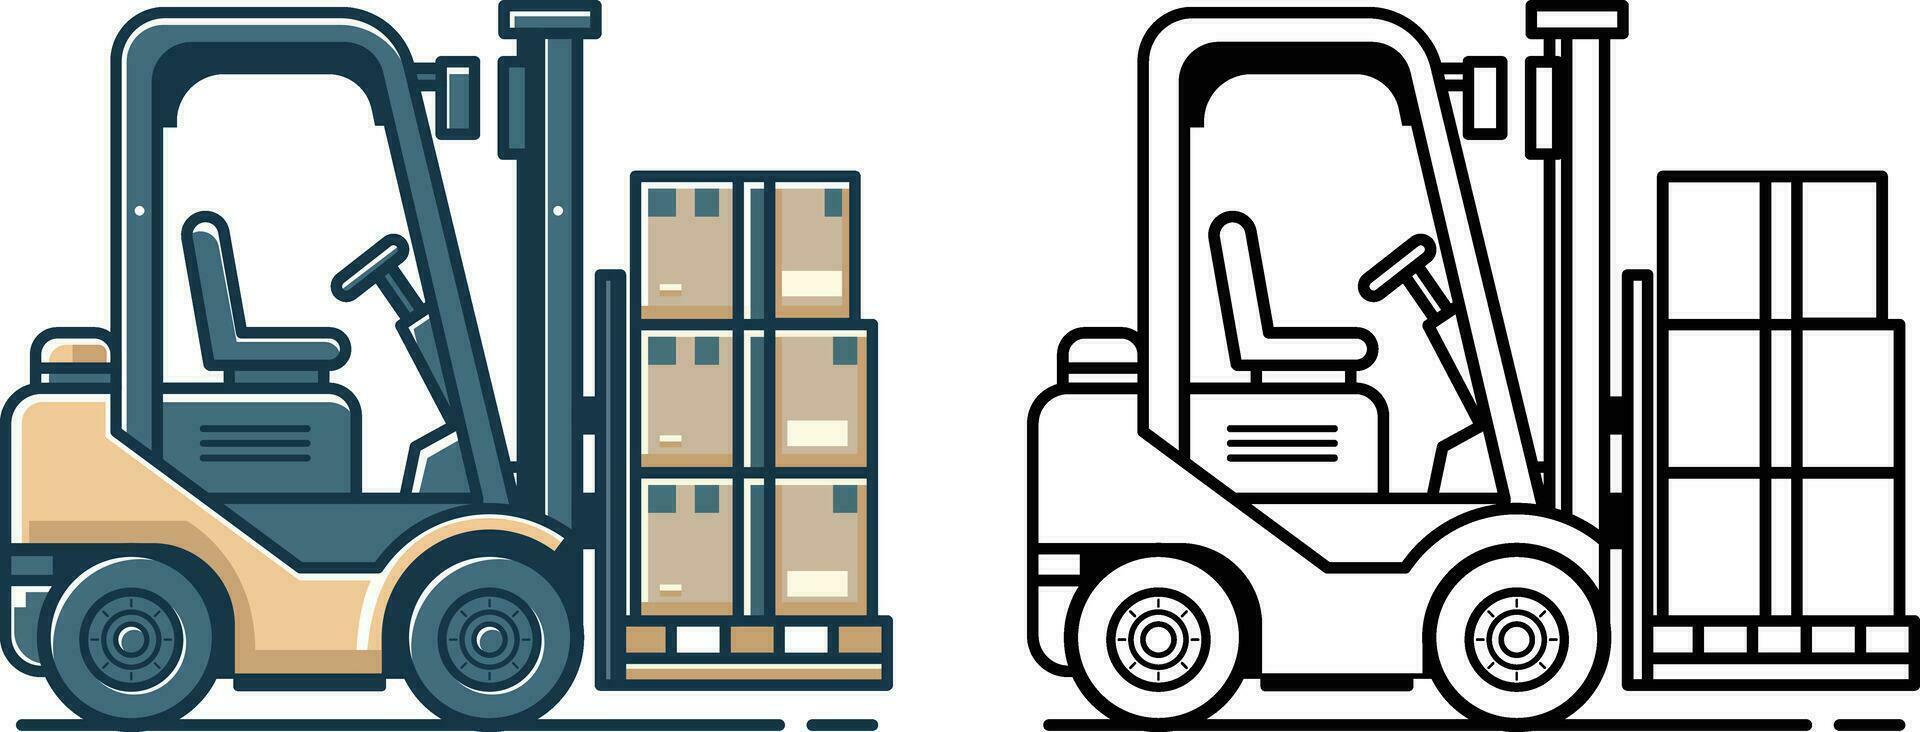 Forklift with boxes on pallet flat style vector illustration, industrial truck, lift truck, jitney, hi lo, fork truck, fork hoist, and forklift truck stock vector image